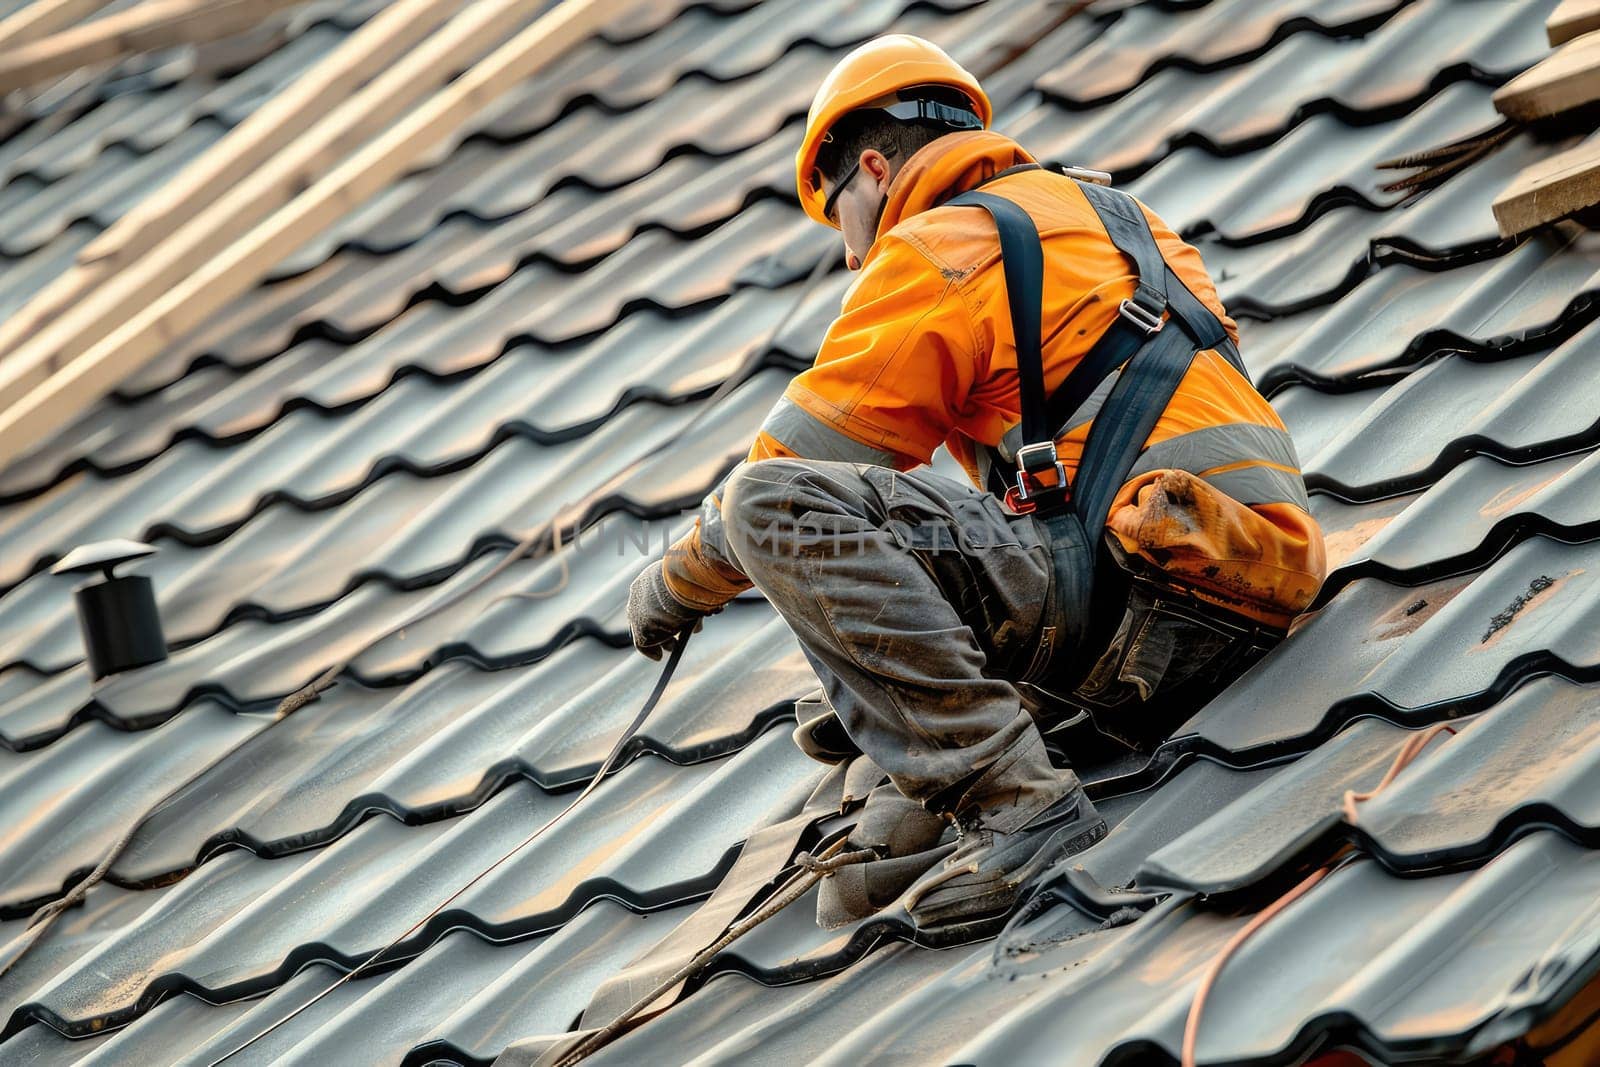 Construction Worker in Safety Gear Installing Roof Tiles with Precision and Care